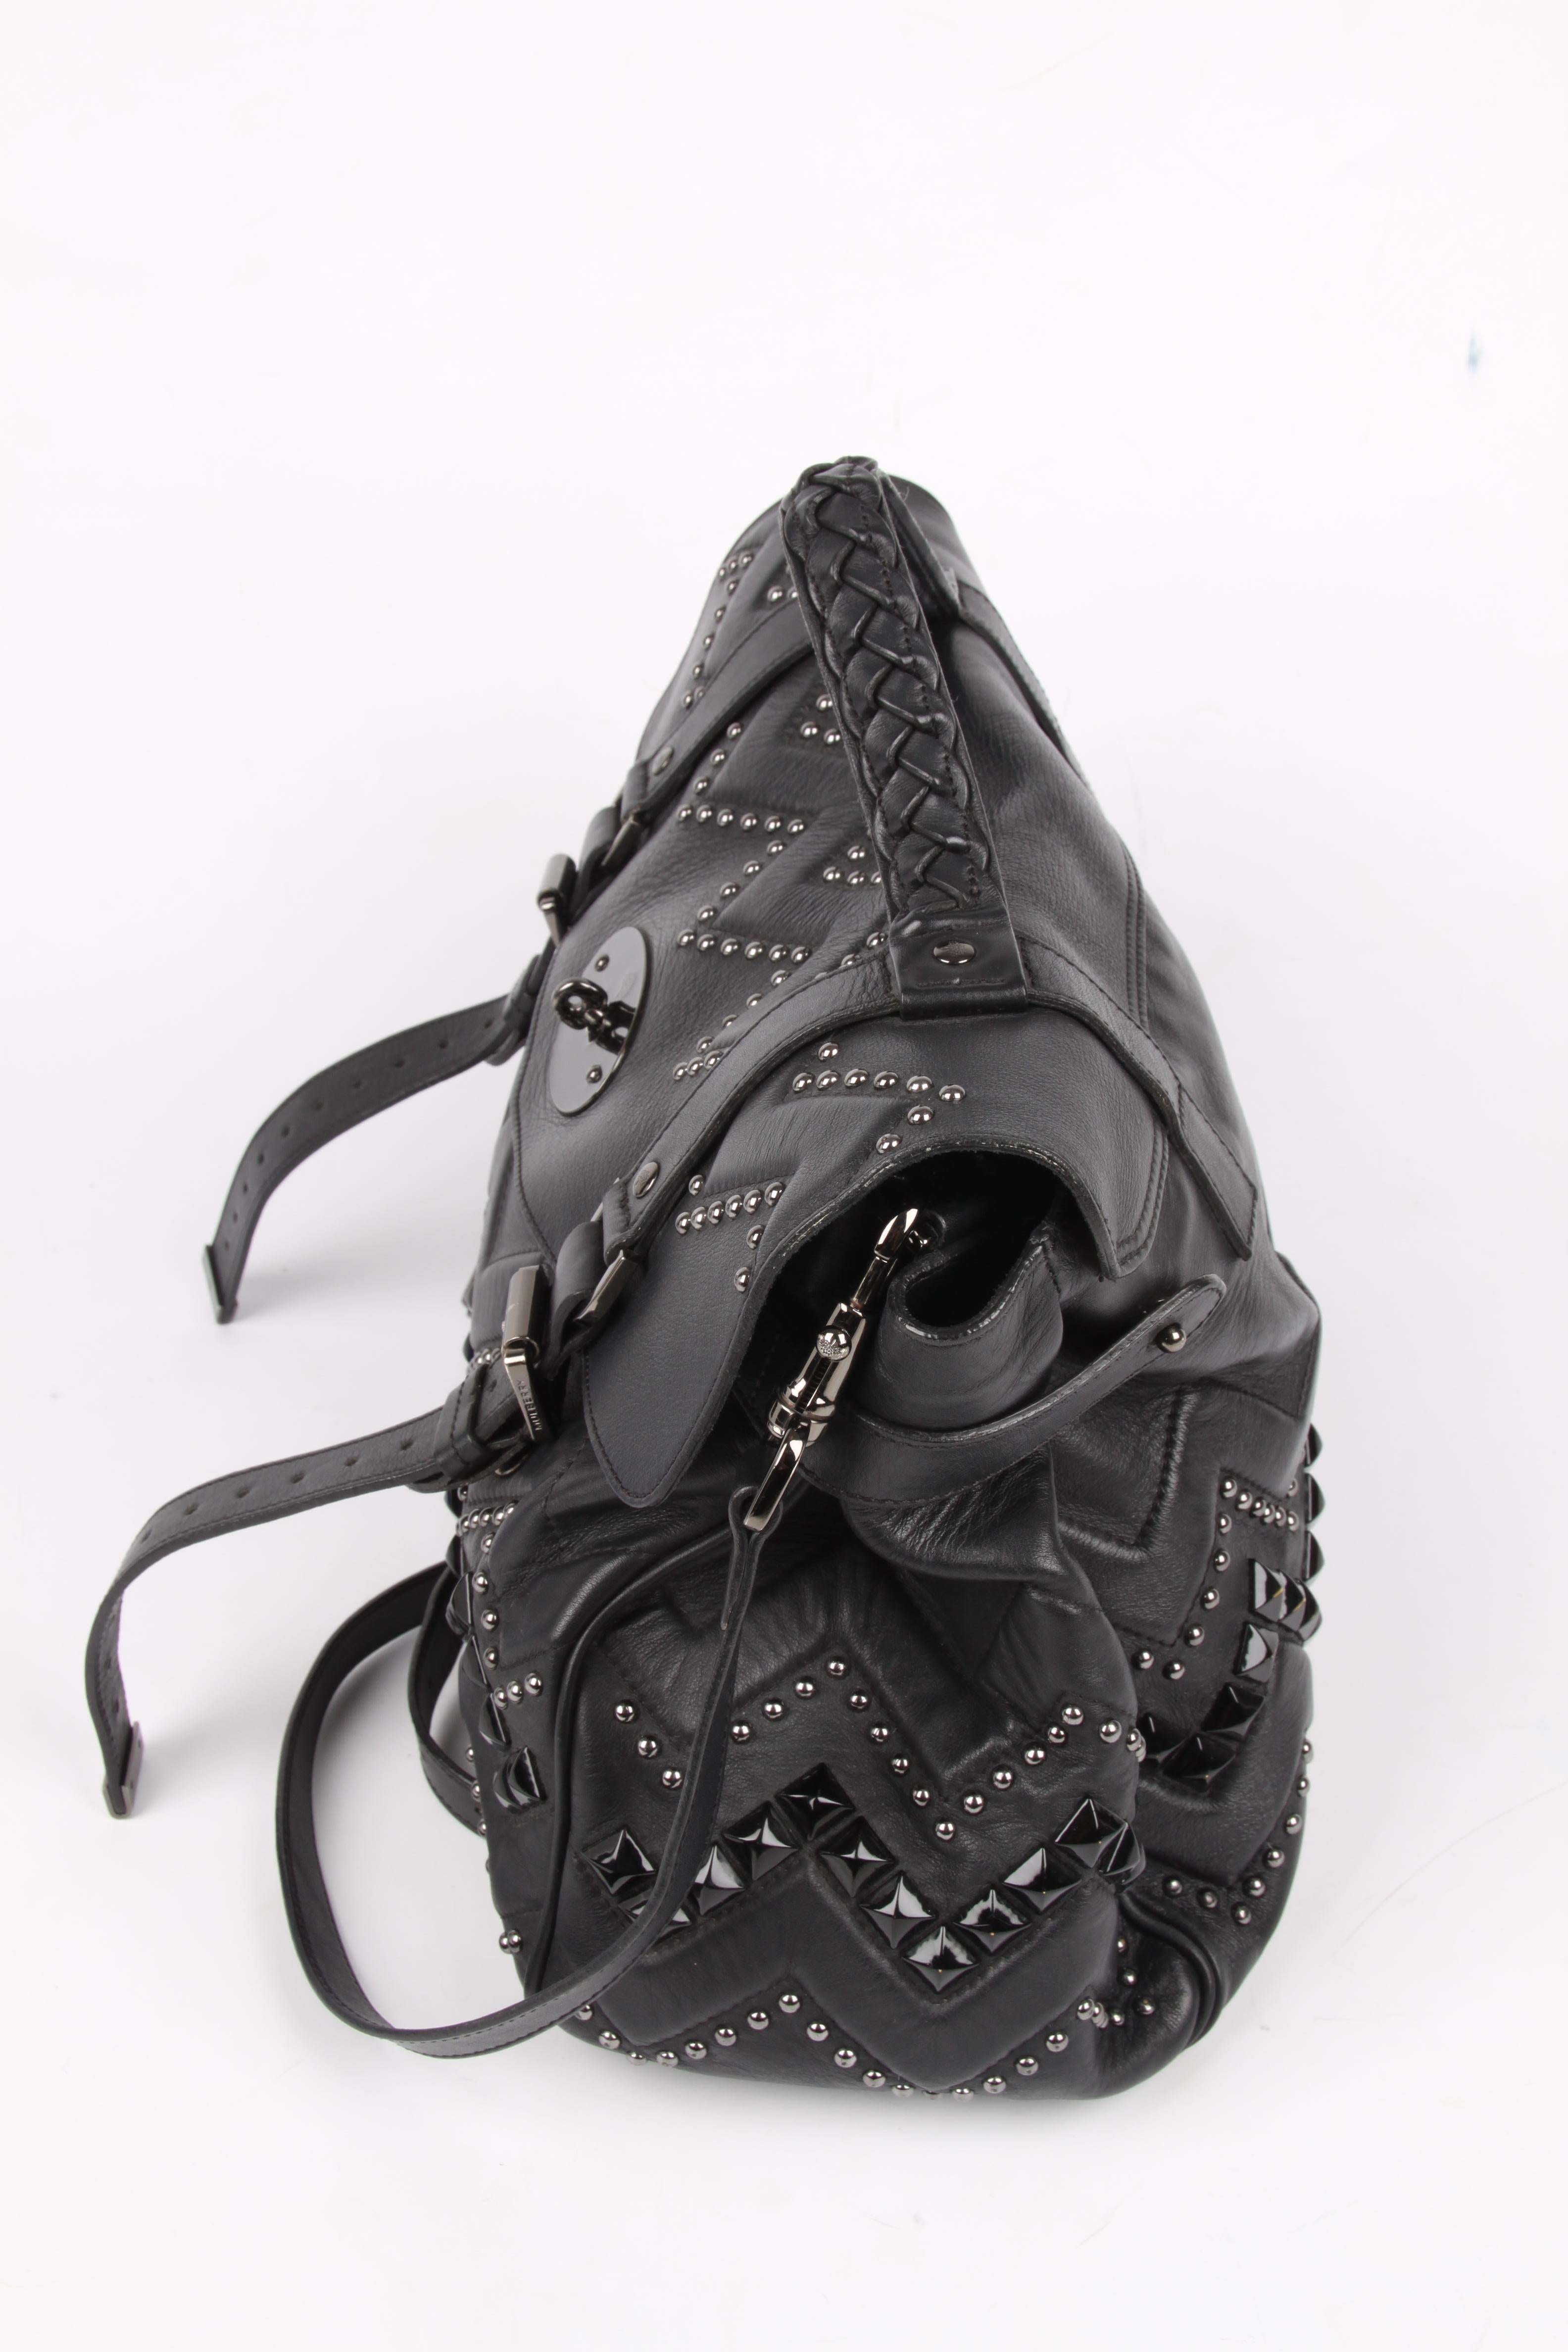 This Mulberry Alexa is crafted from black leather with a geometrical pattern of silver and black studs, that's why it's called Zig Zag. 

Blackish/silver-tone hardware, a long detachable shoulder strap and a braided handle on top. No lining, two